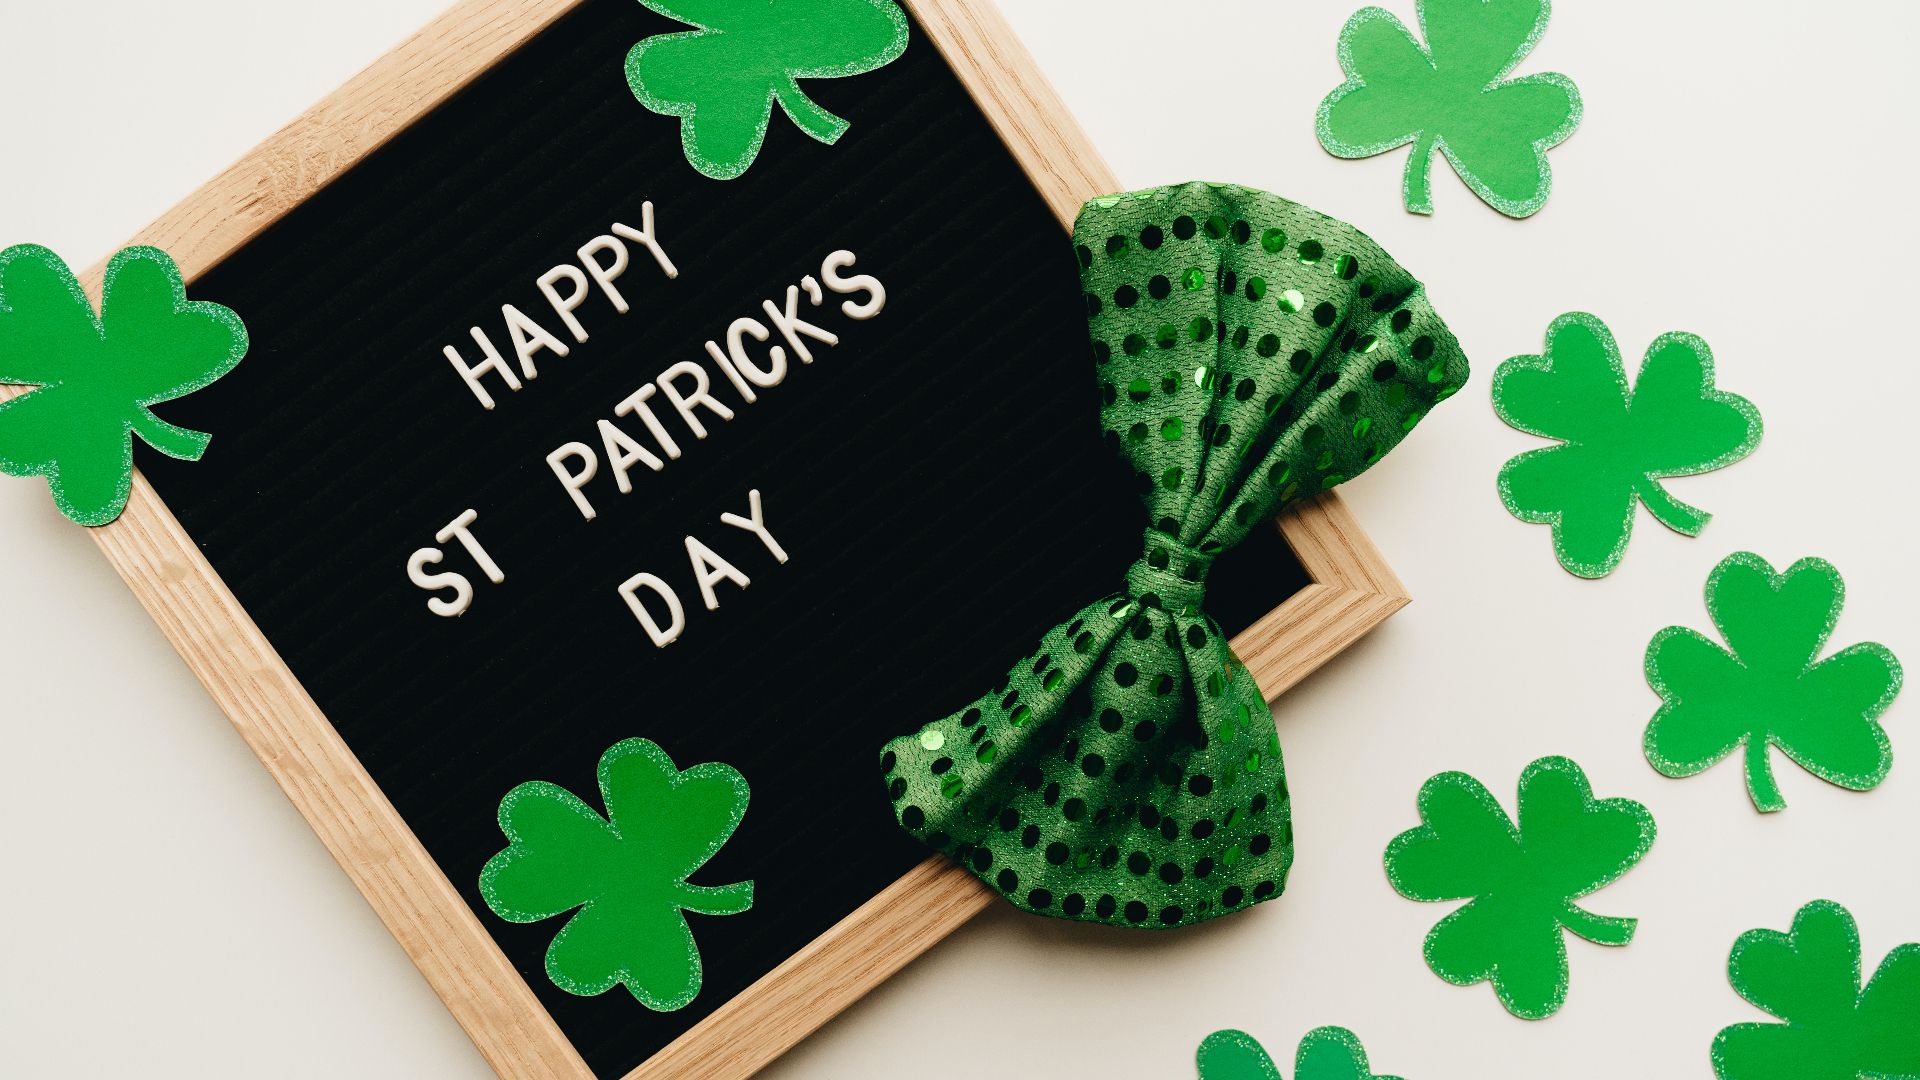 a letter board with St. Patrick's day spelled out next to green paper shamrocks